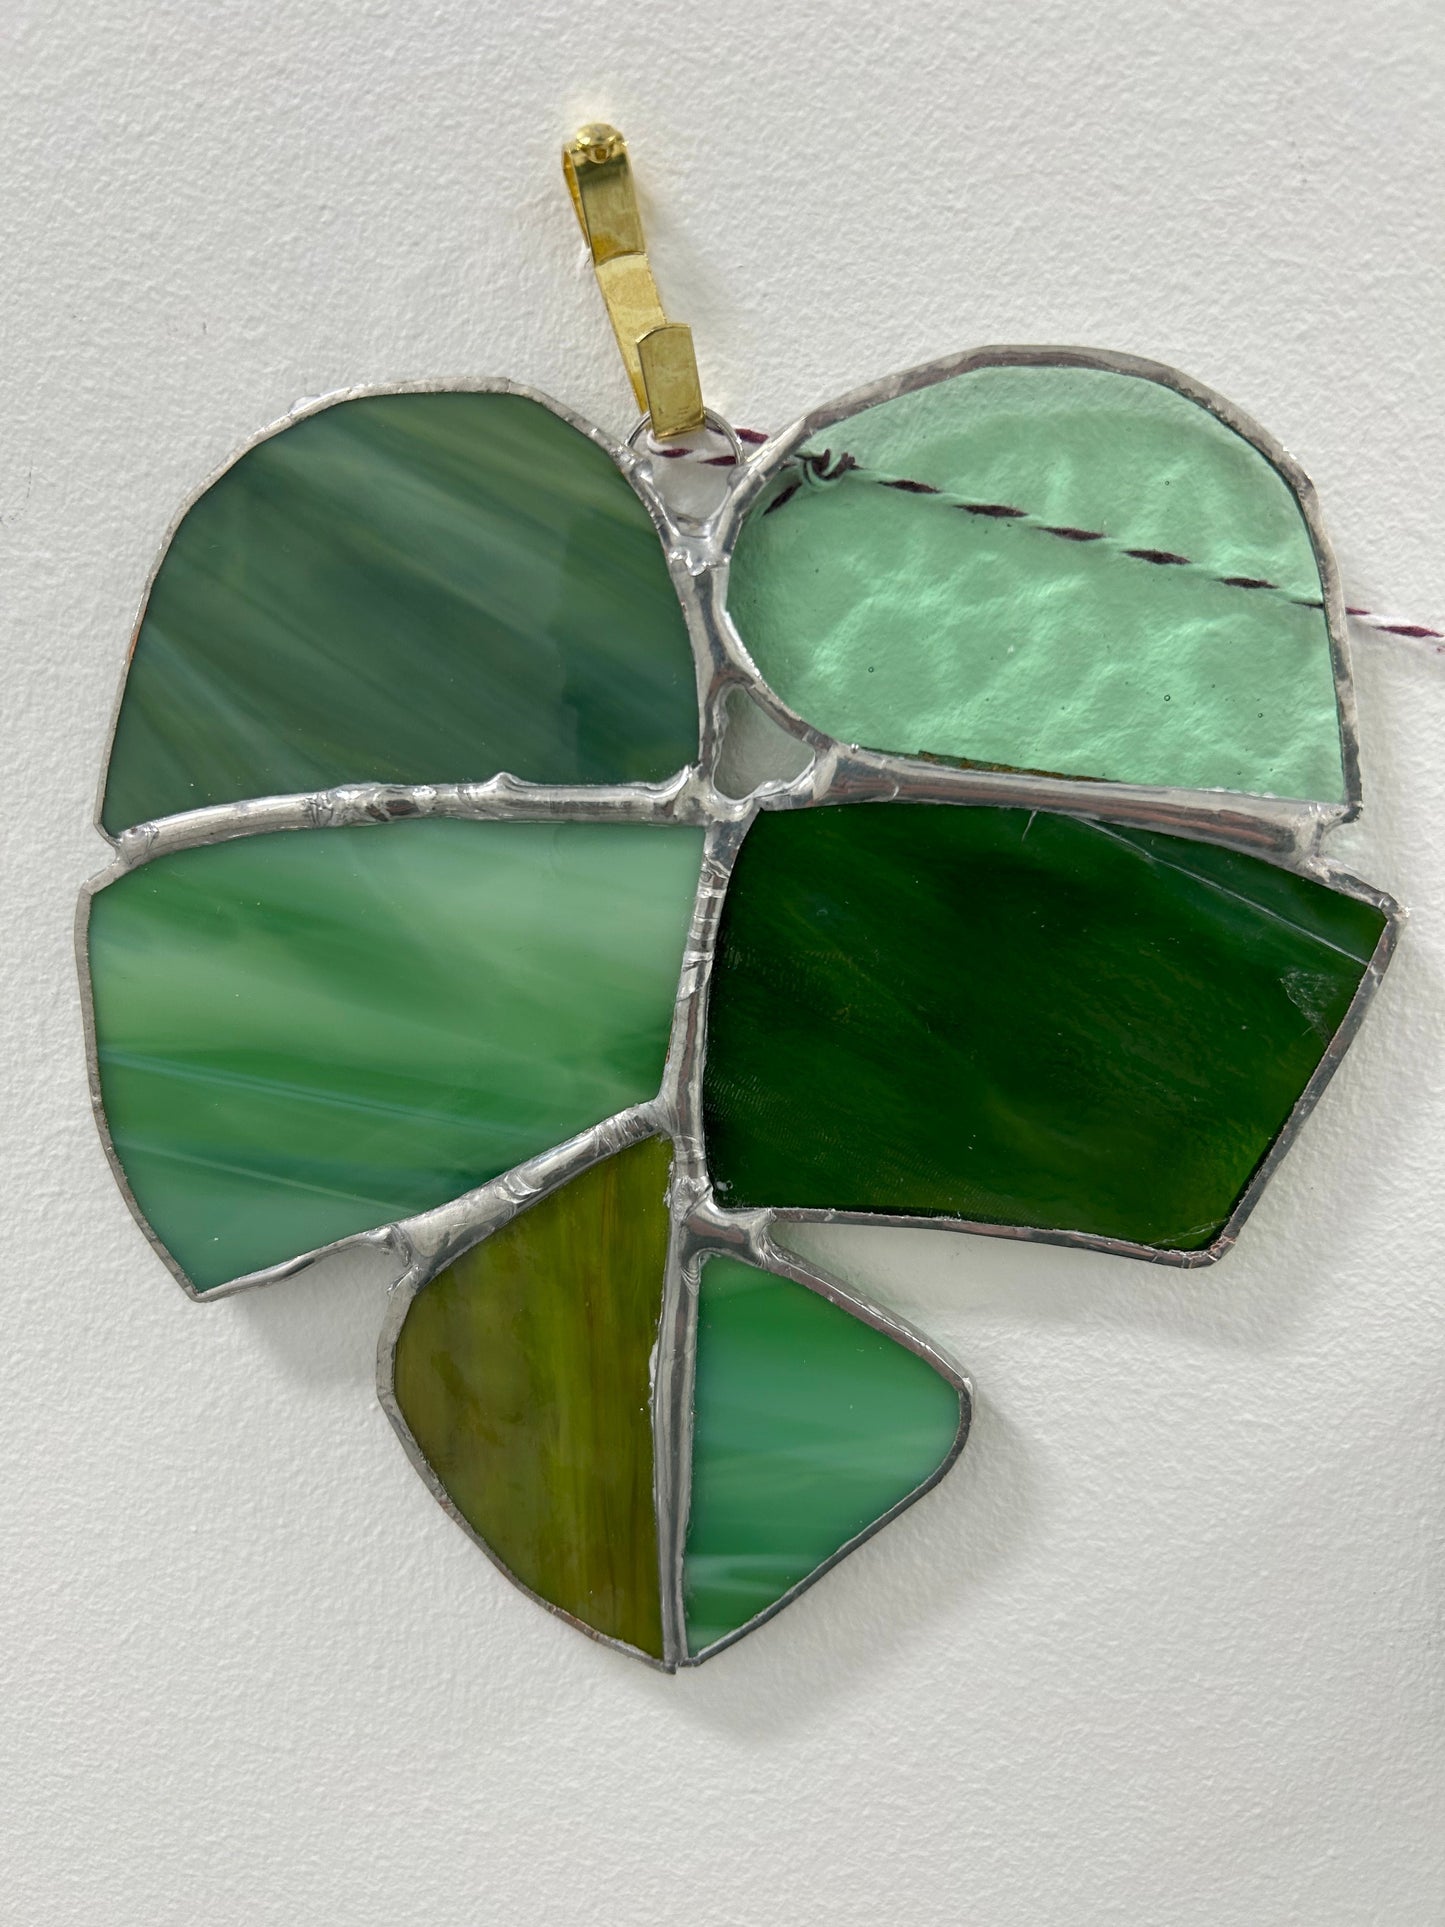 Beginner Stained Glass class, March 23, 11-2